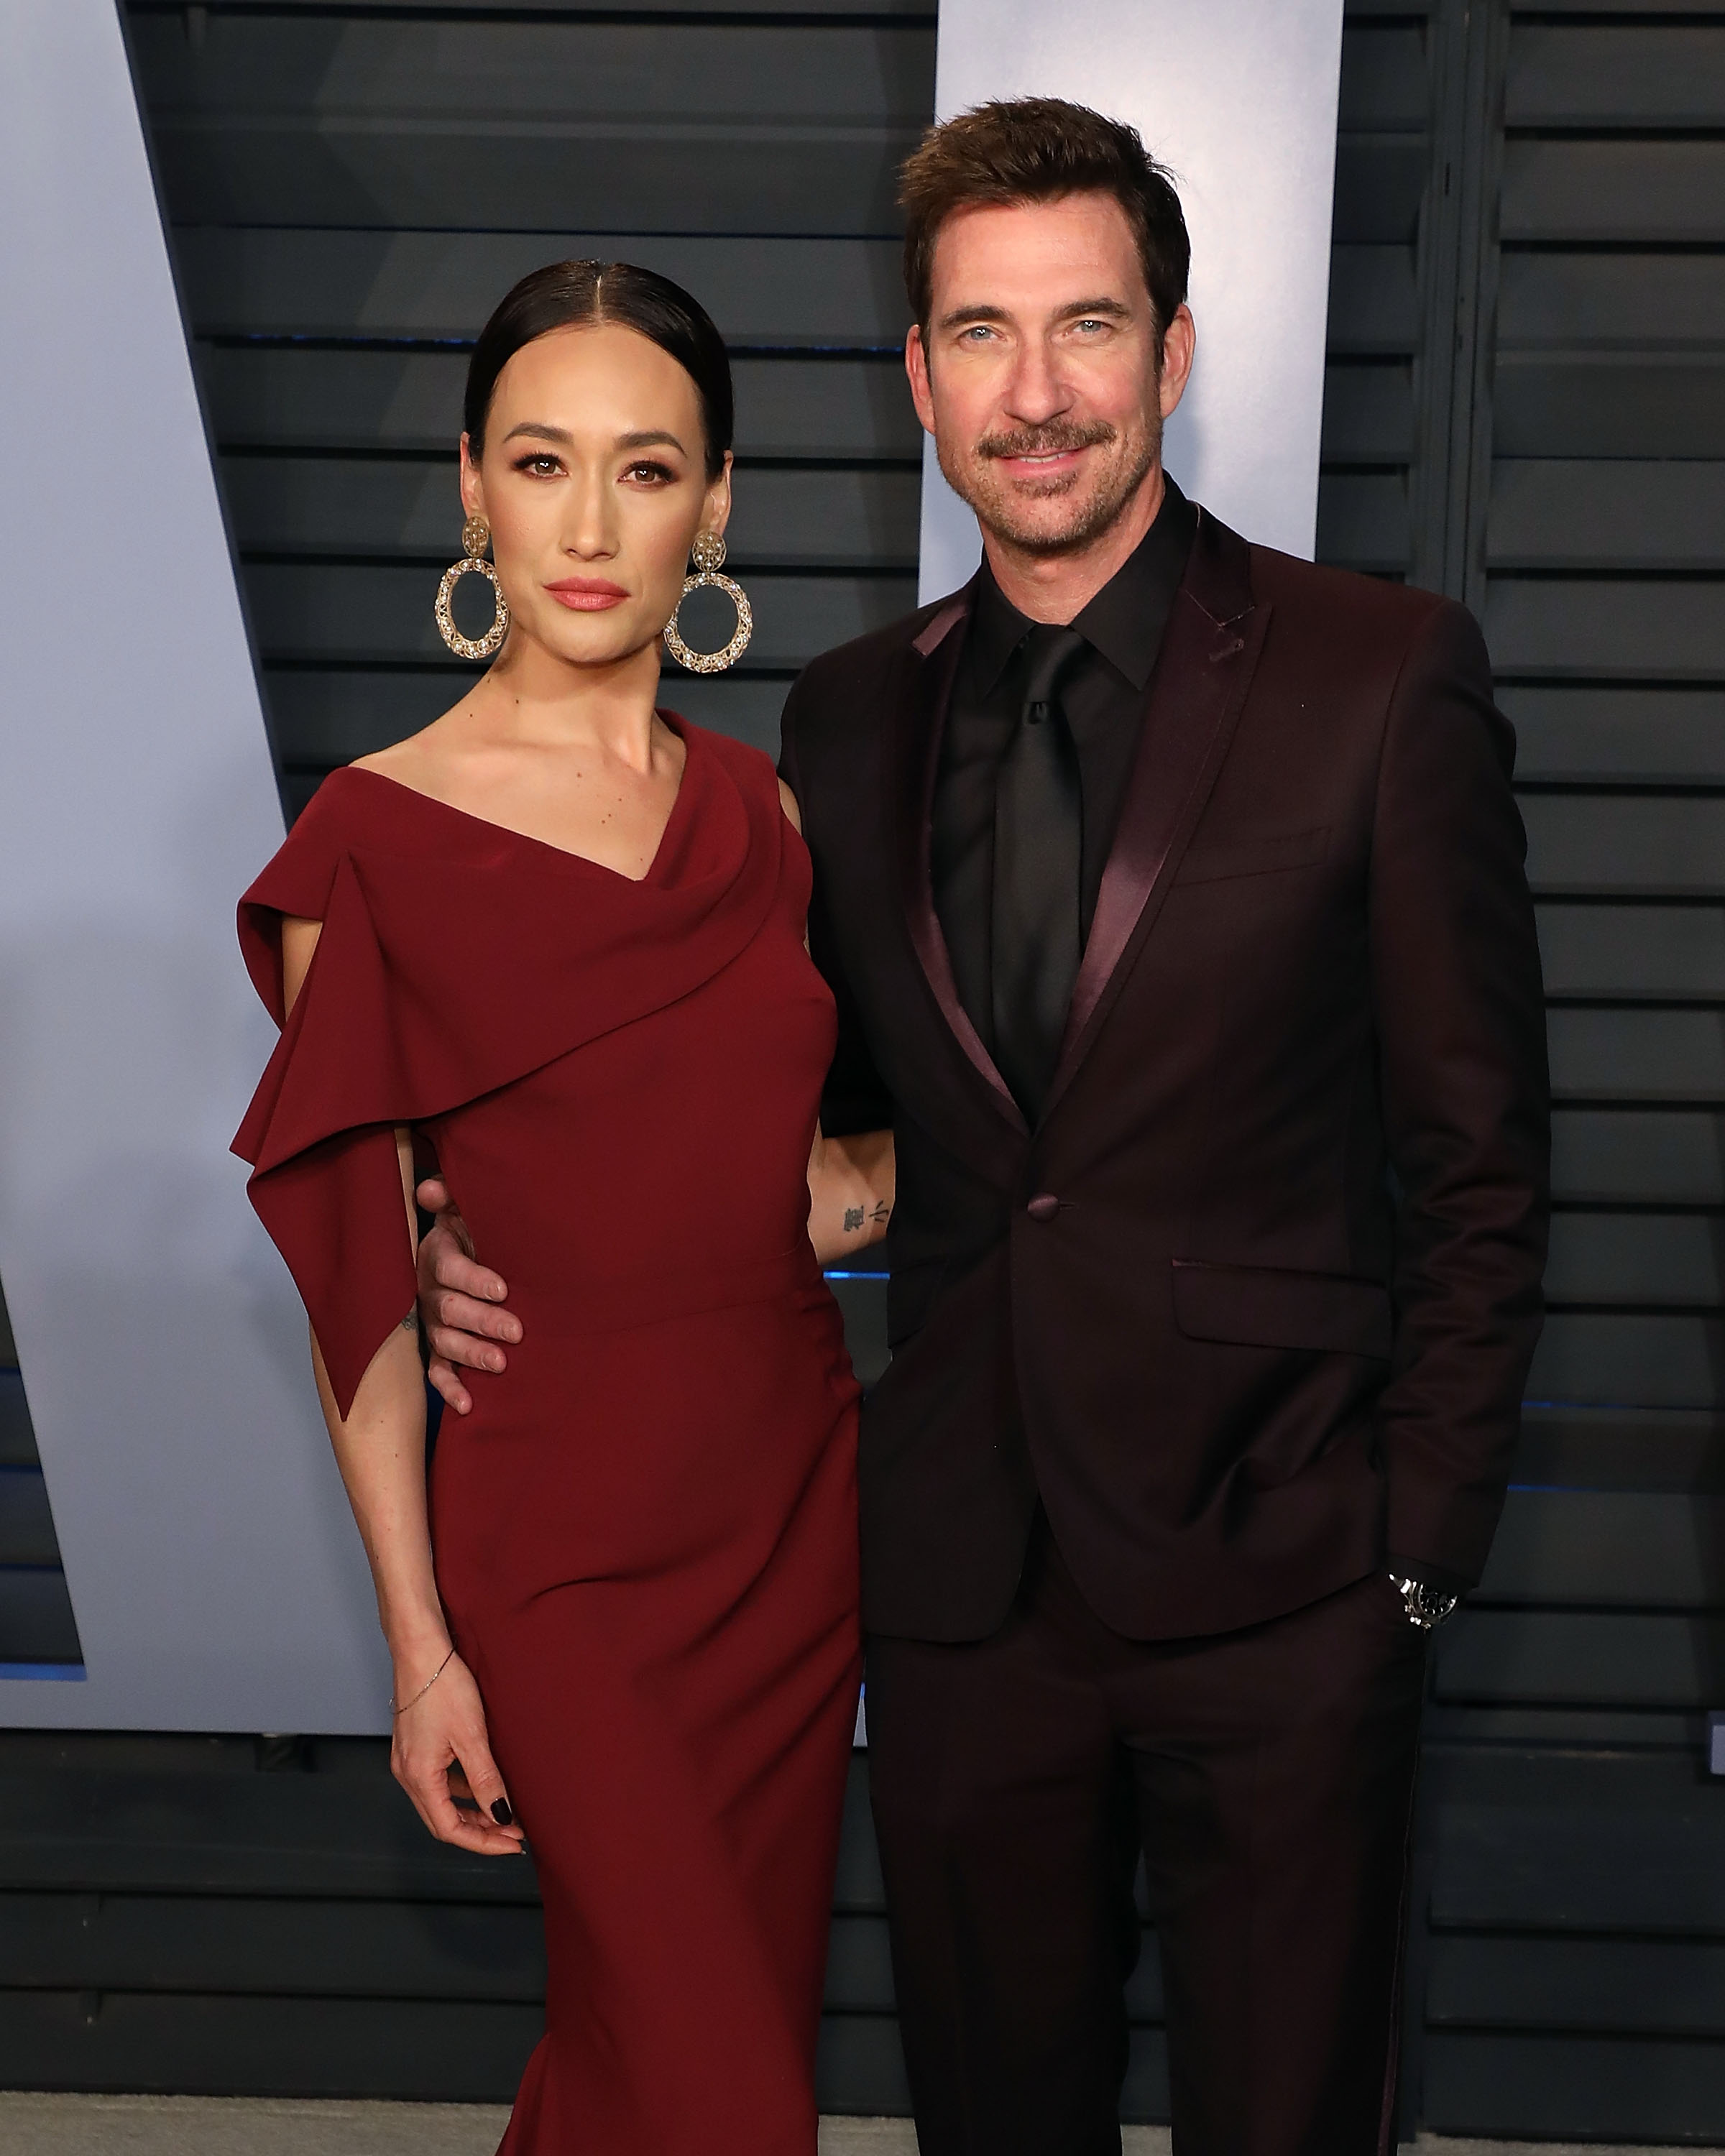 Maggie Q and Dylan McDermott at the 2018 Vanity Fair Oscar Party hosted by Radhika Jones on March 4, 2018, in Beverly Hills, California | Source: Getty Images